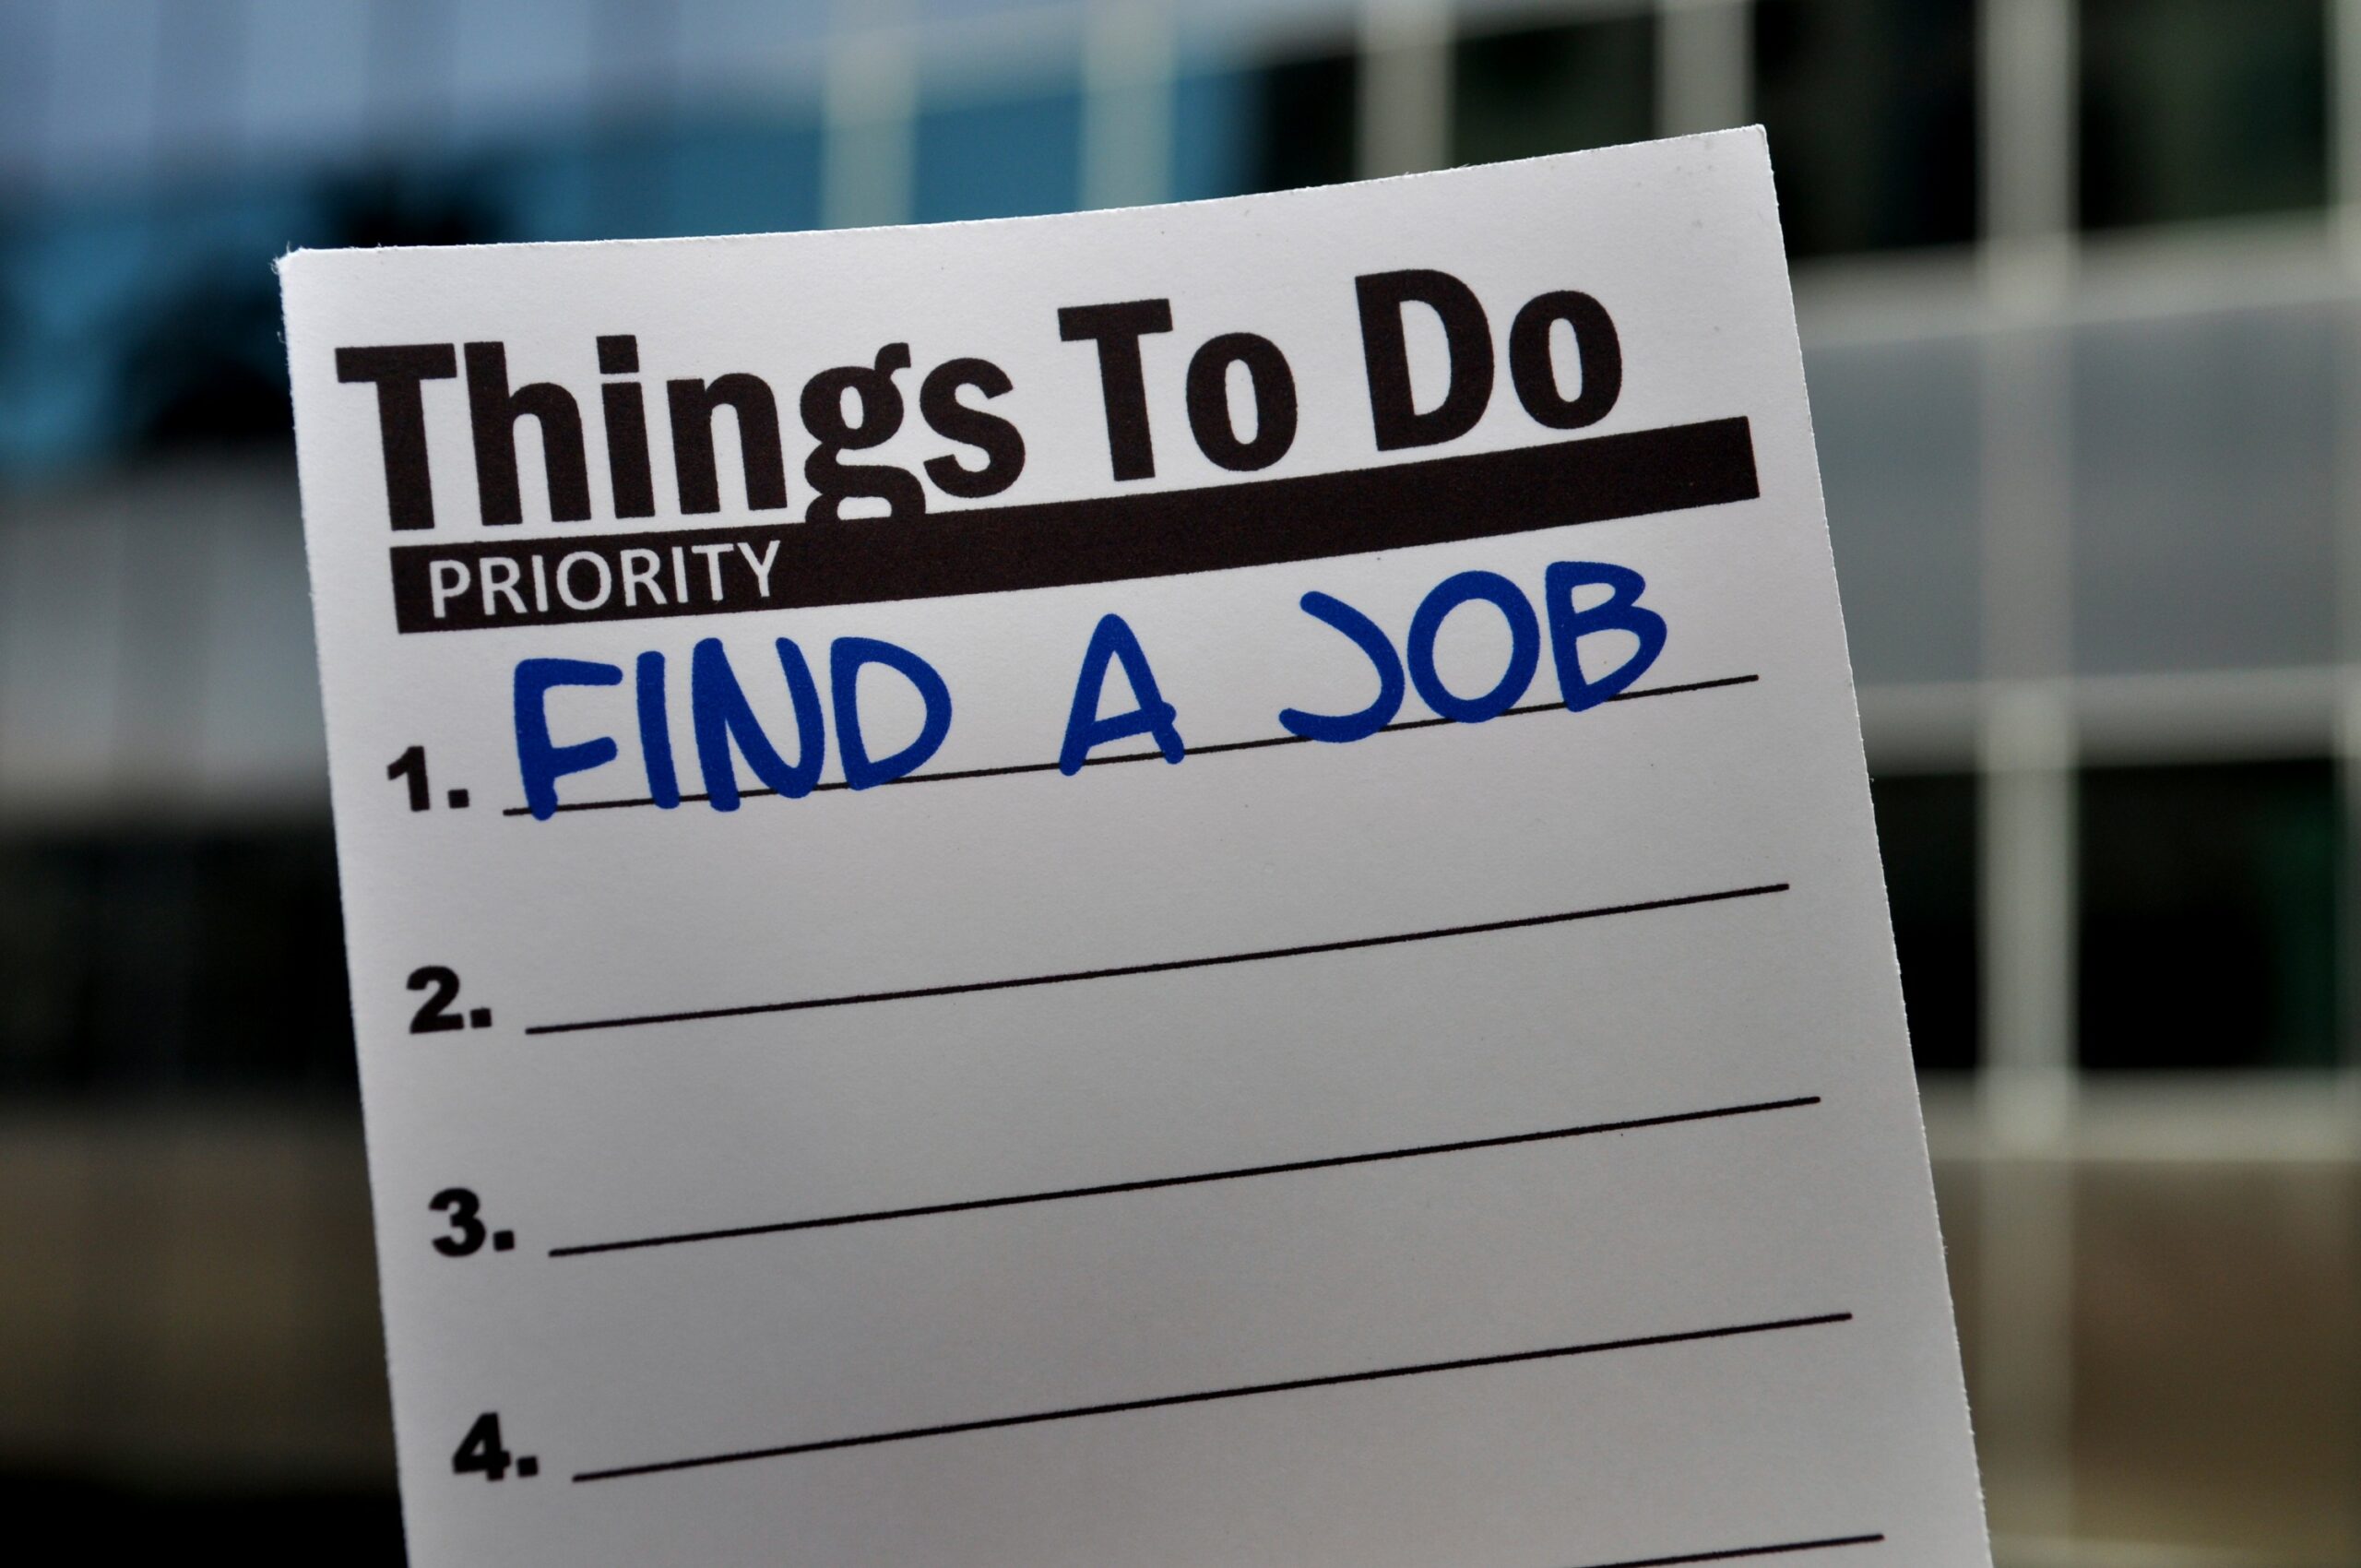 7 Effective Ways to Search for a New Job